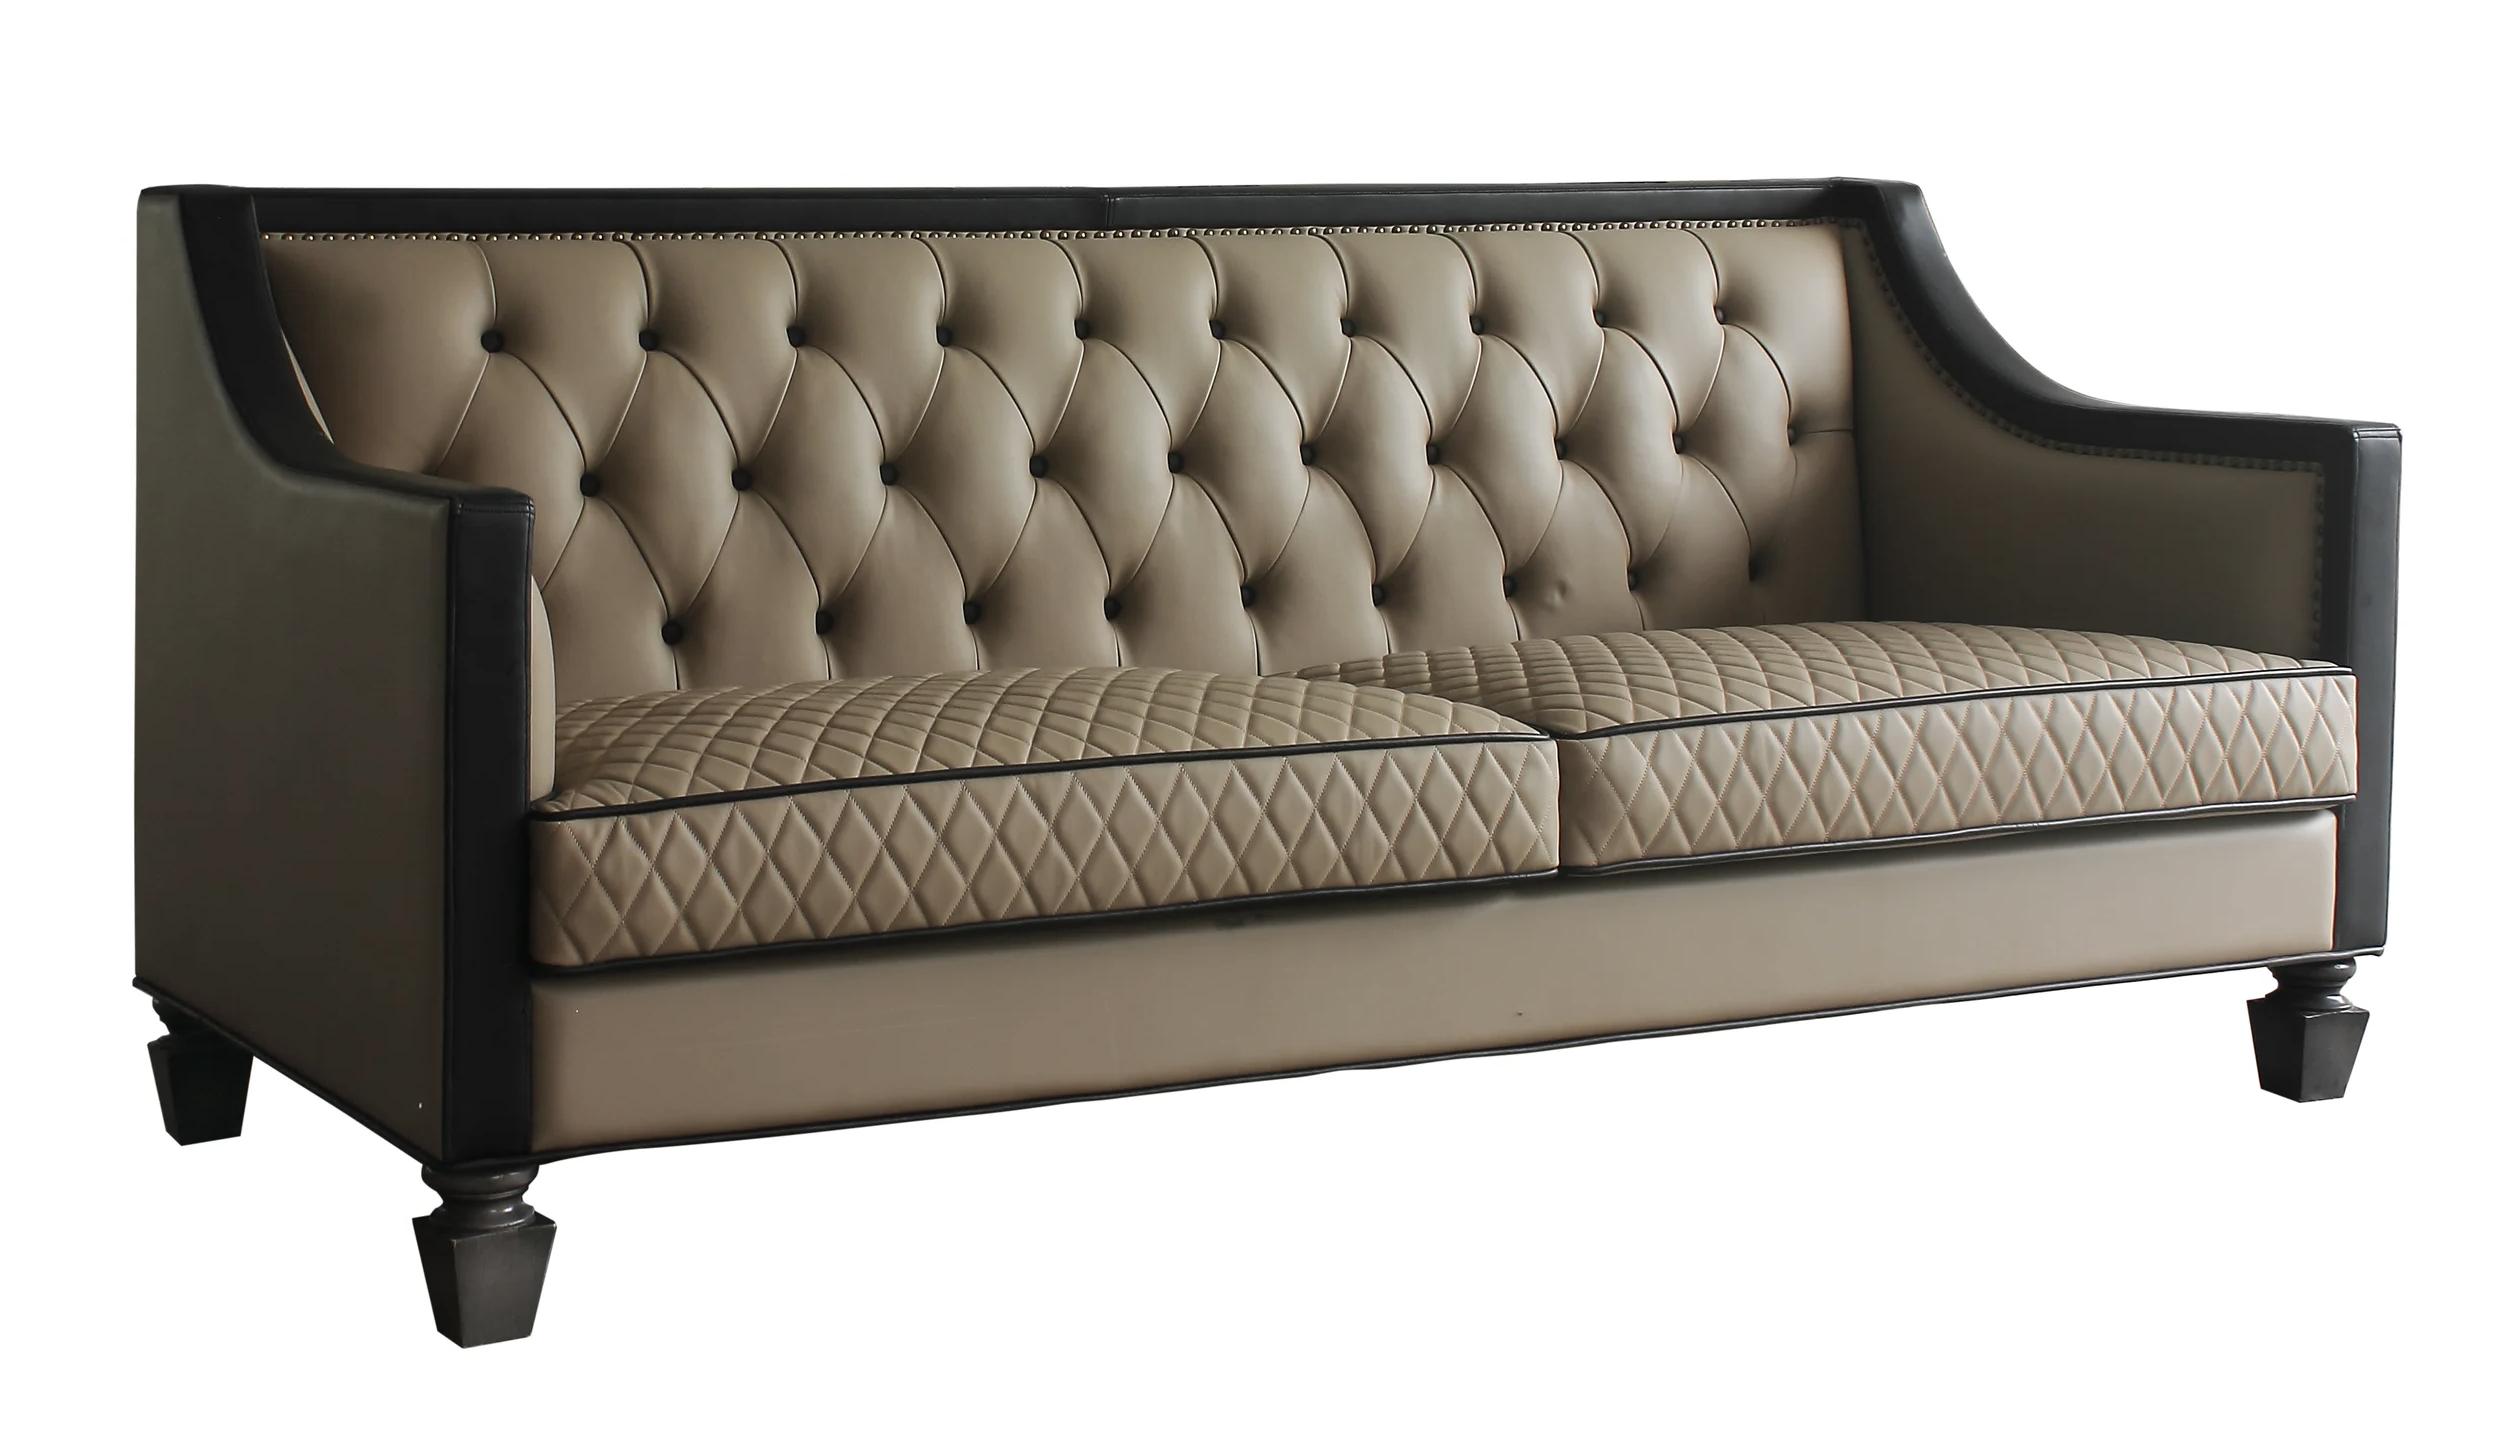 

    
Transitional Tan Sofa by Acme House Beatrice 58815
